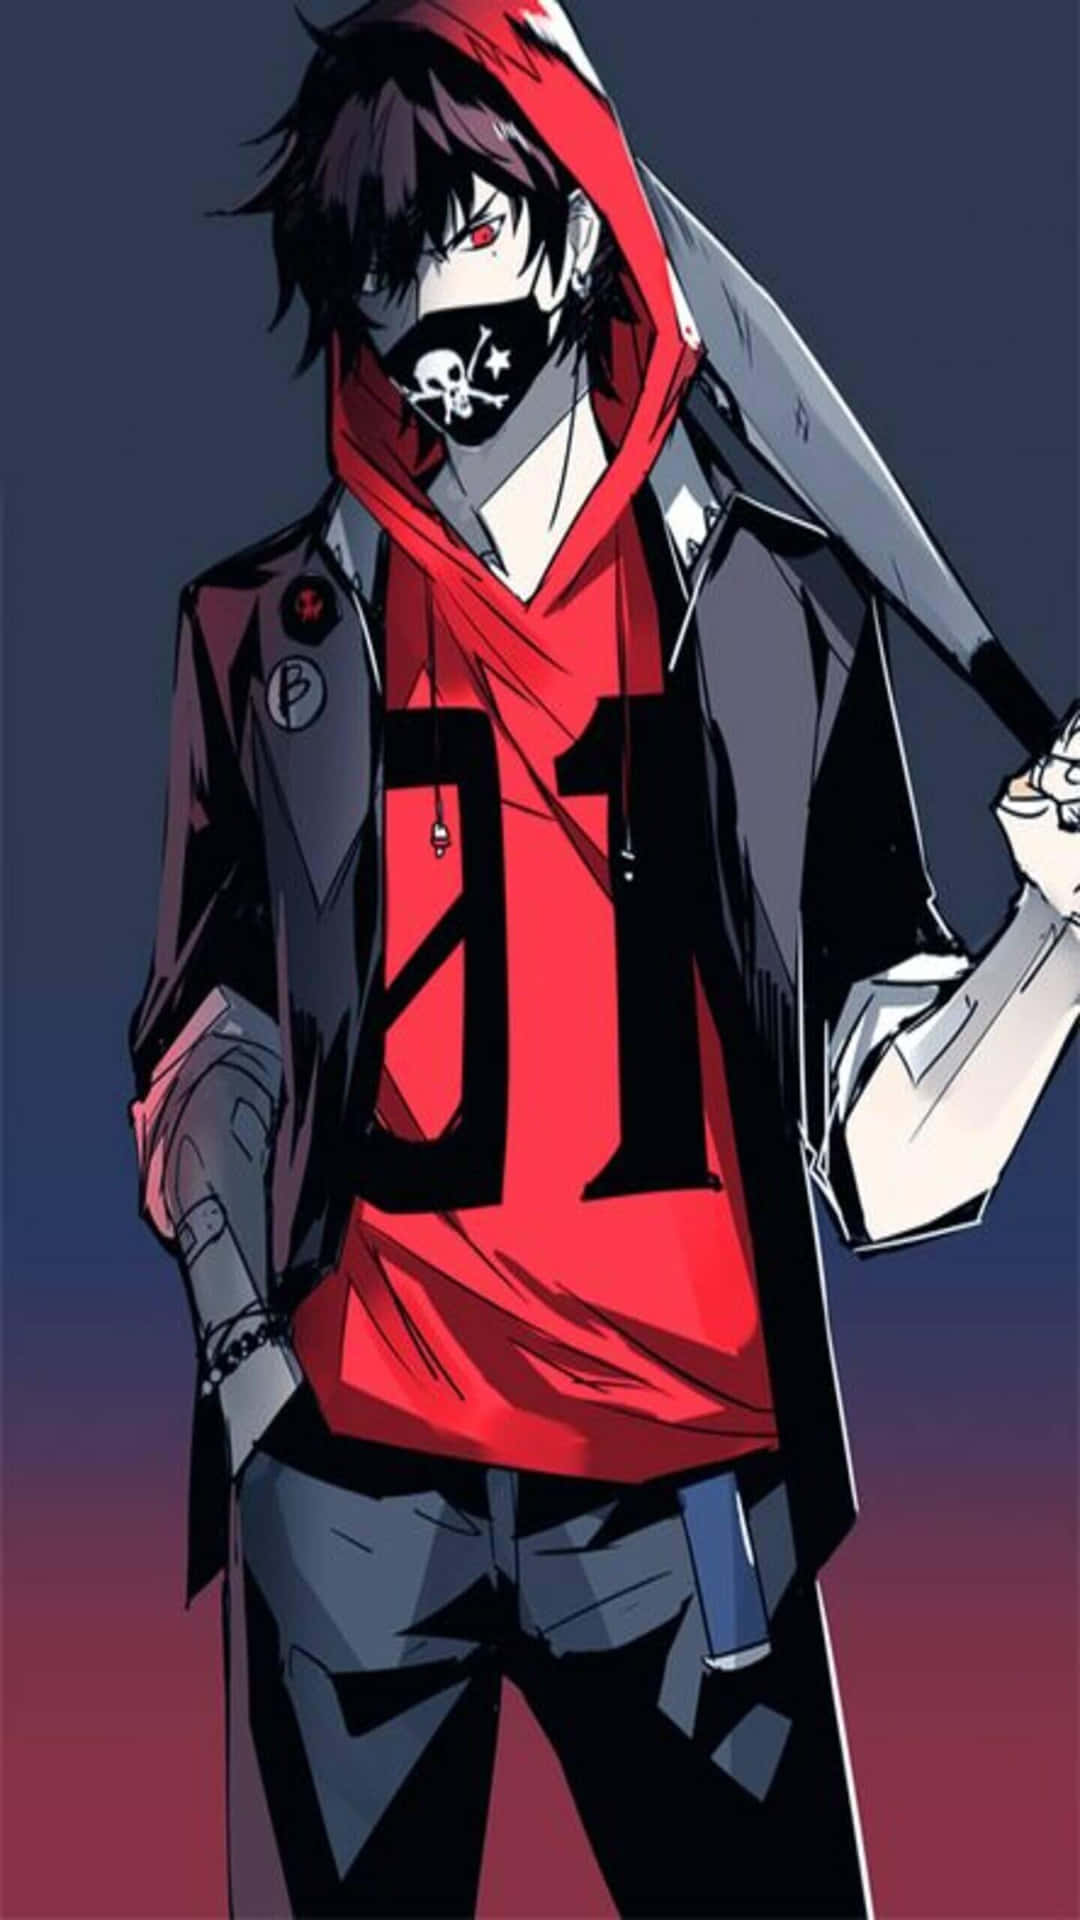 "The edgy, rebellious persona of bad boy anime characters is sure to engage viewers" Wallpaper